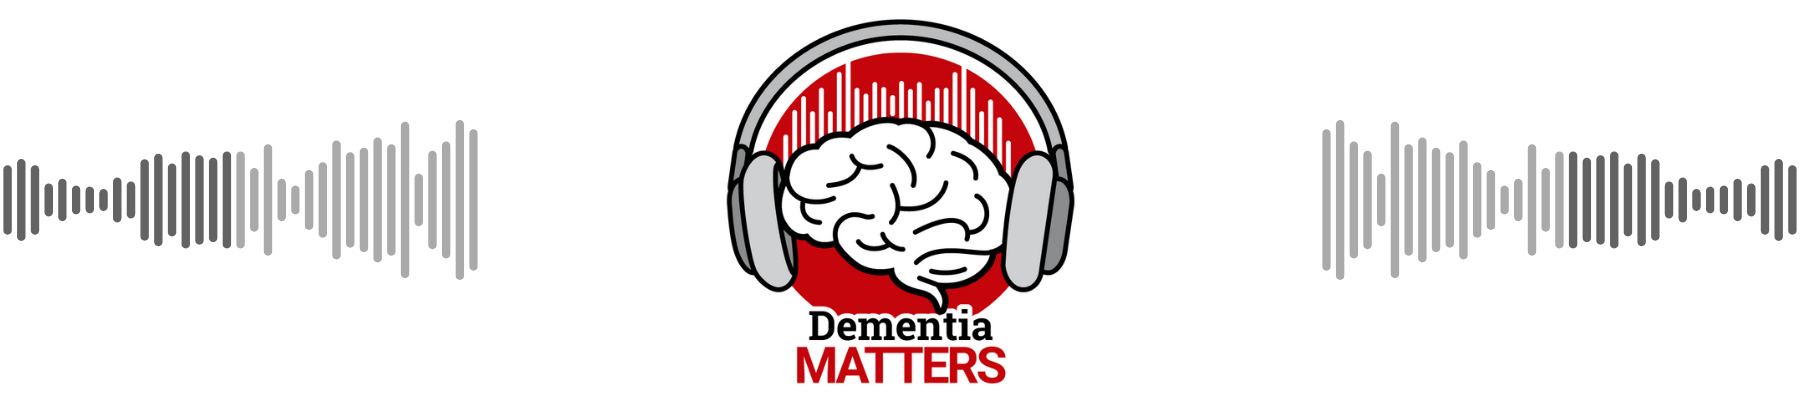 Dementia Matters logo, which consists of an illustration of a brain wearing headphones with sounds waves in the background